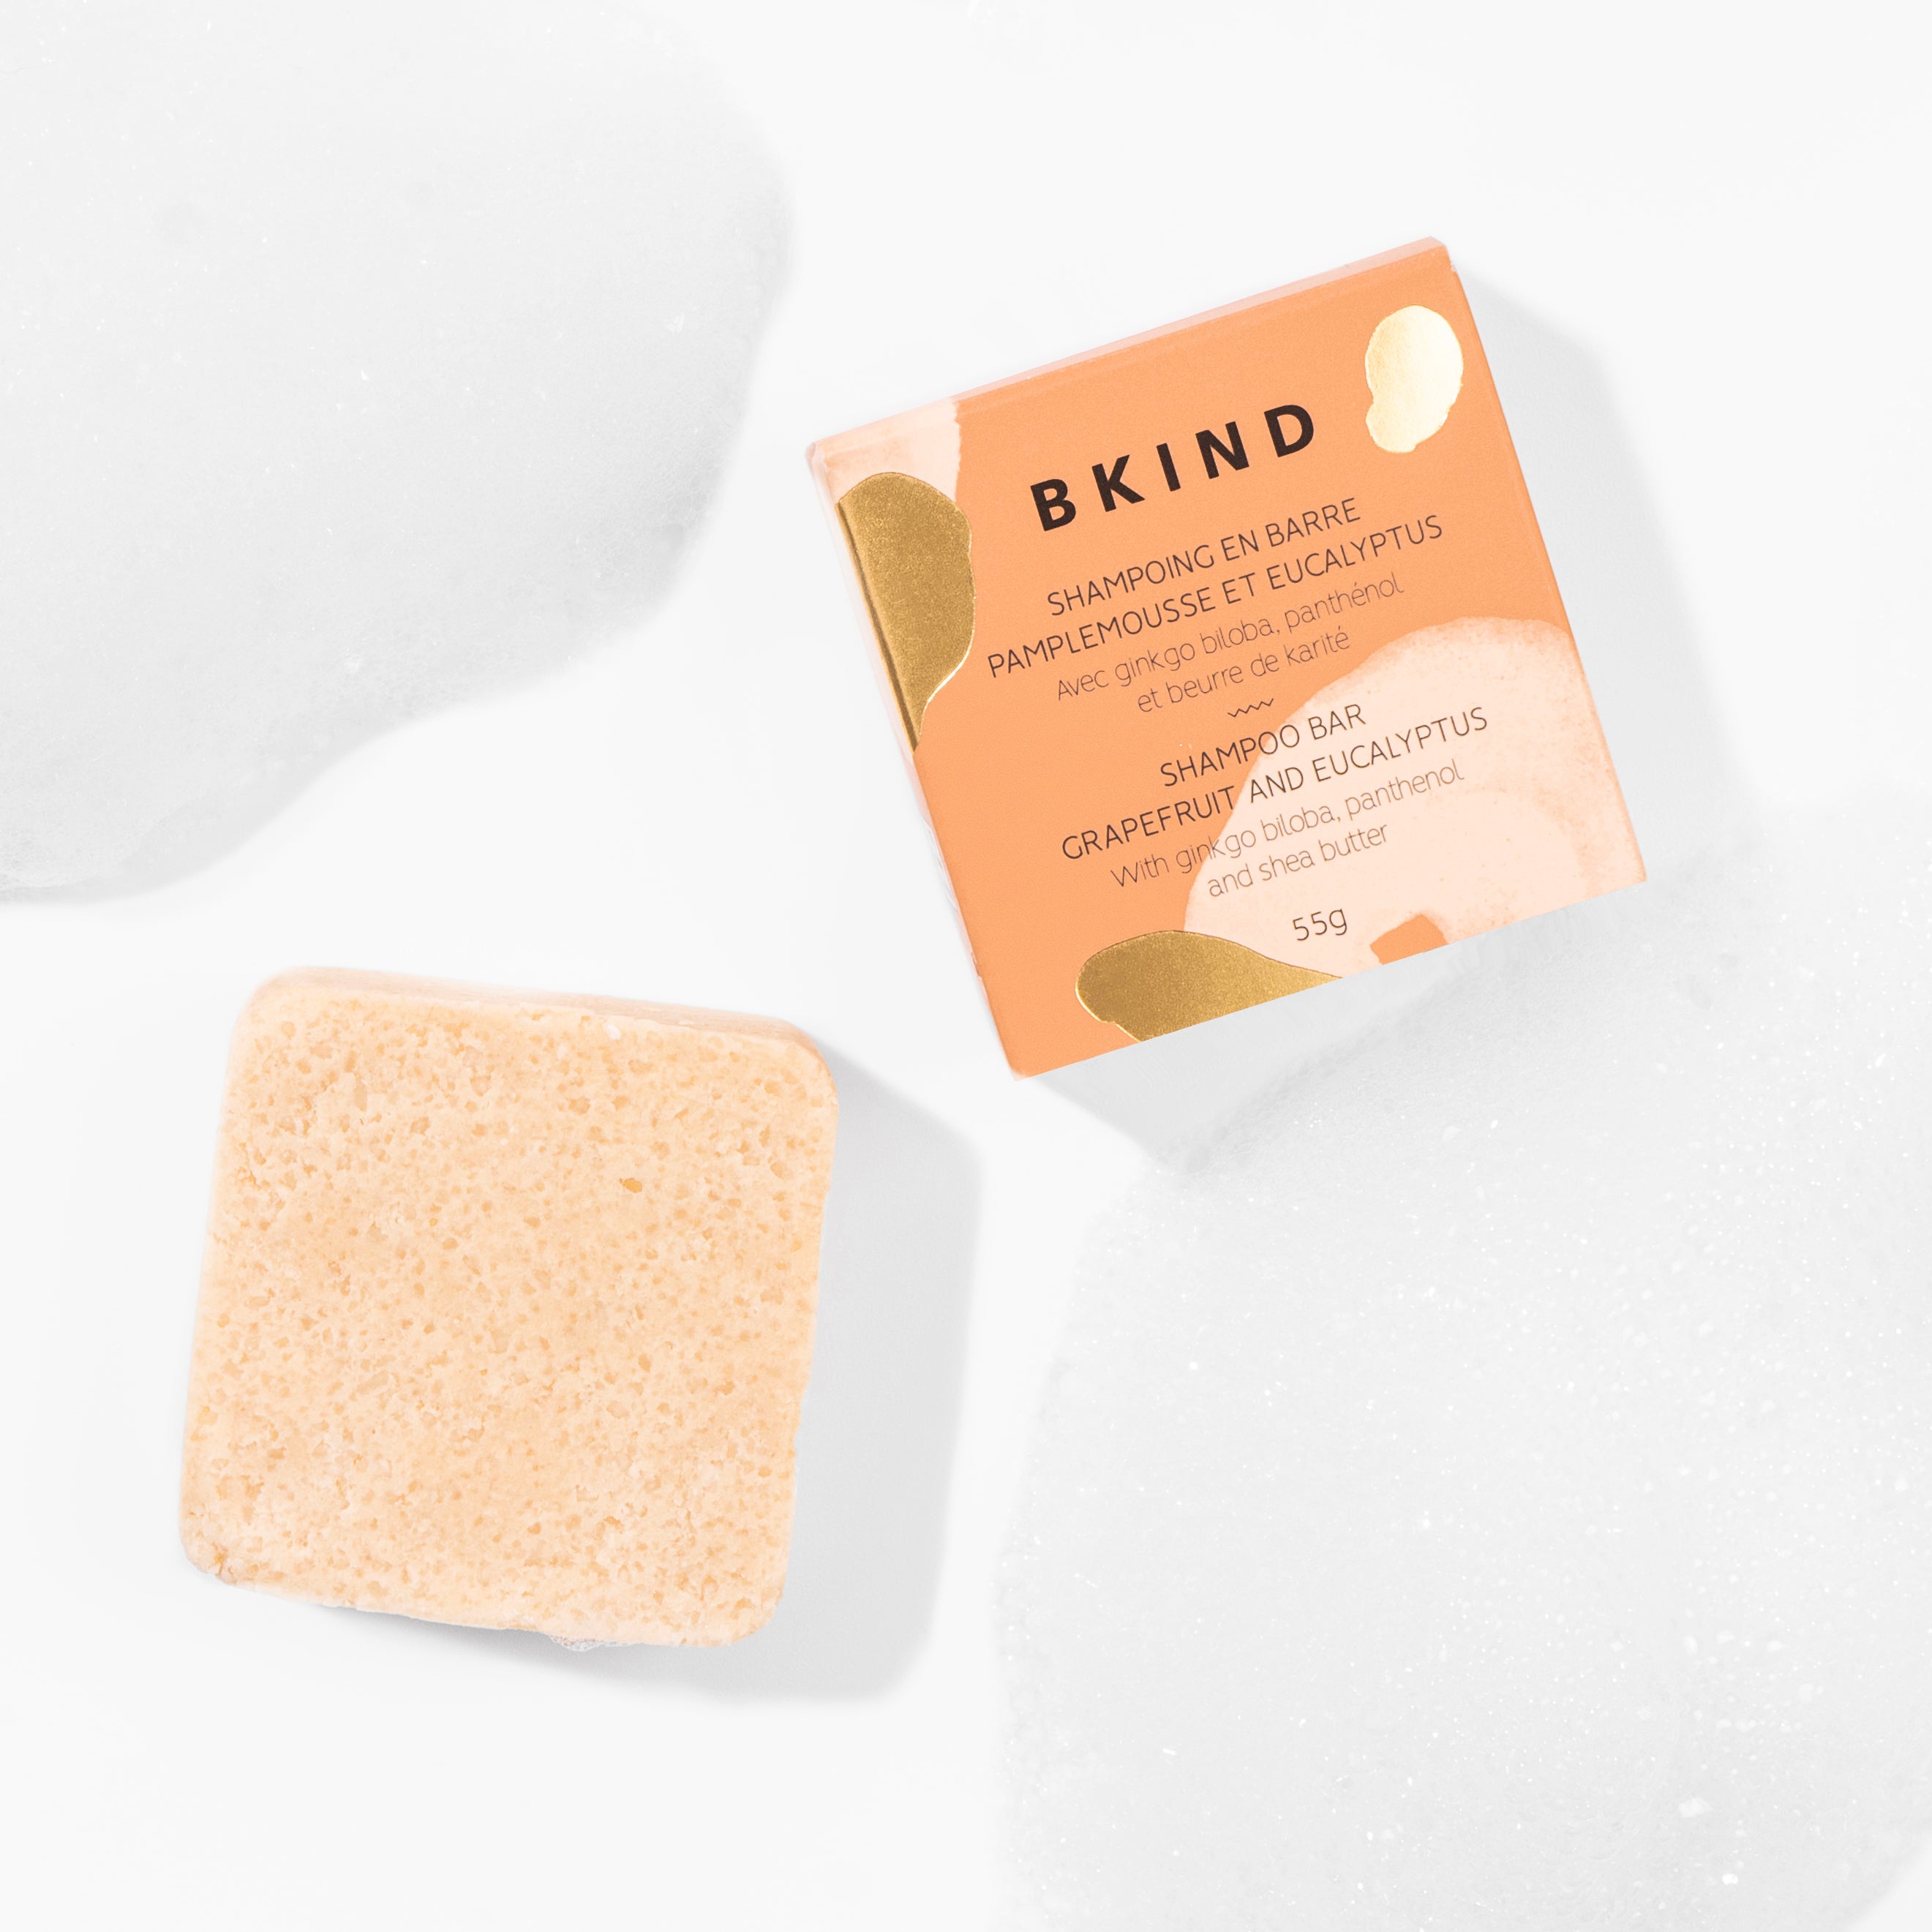 Shampoo bar - Normal and/or oily hair vegan natural sulfate-freeBKIND